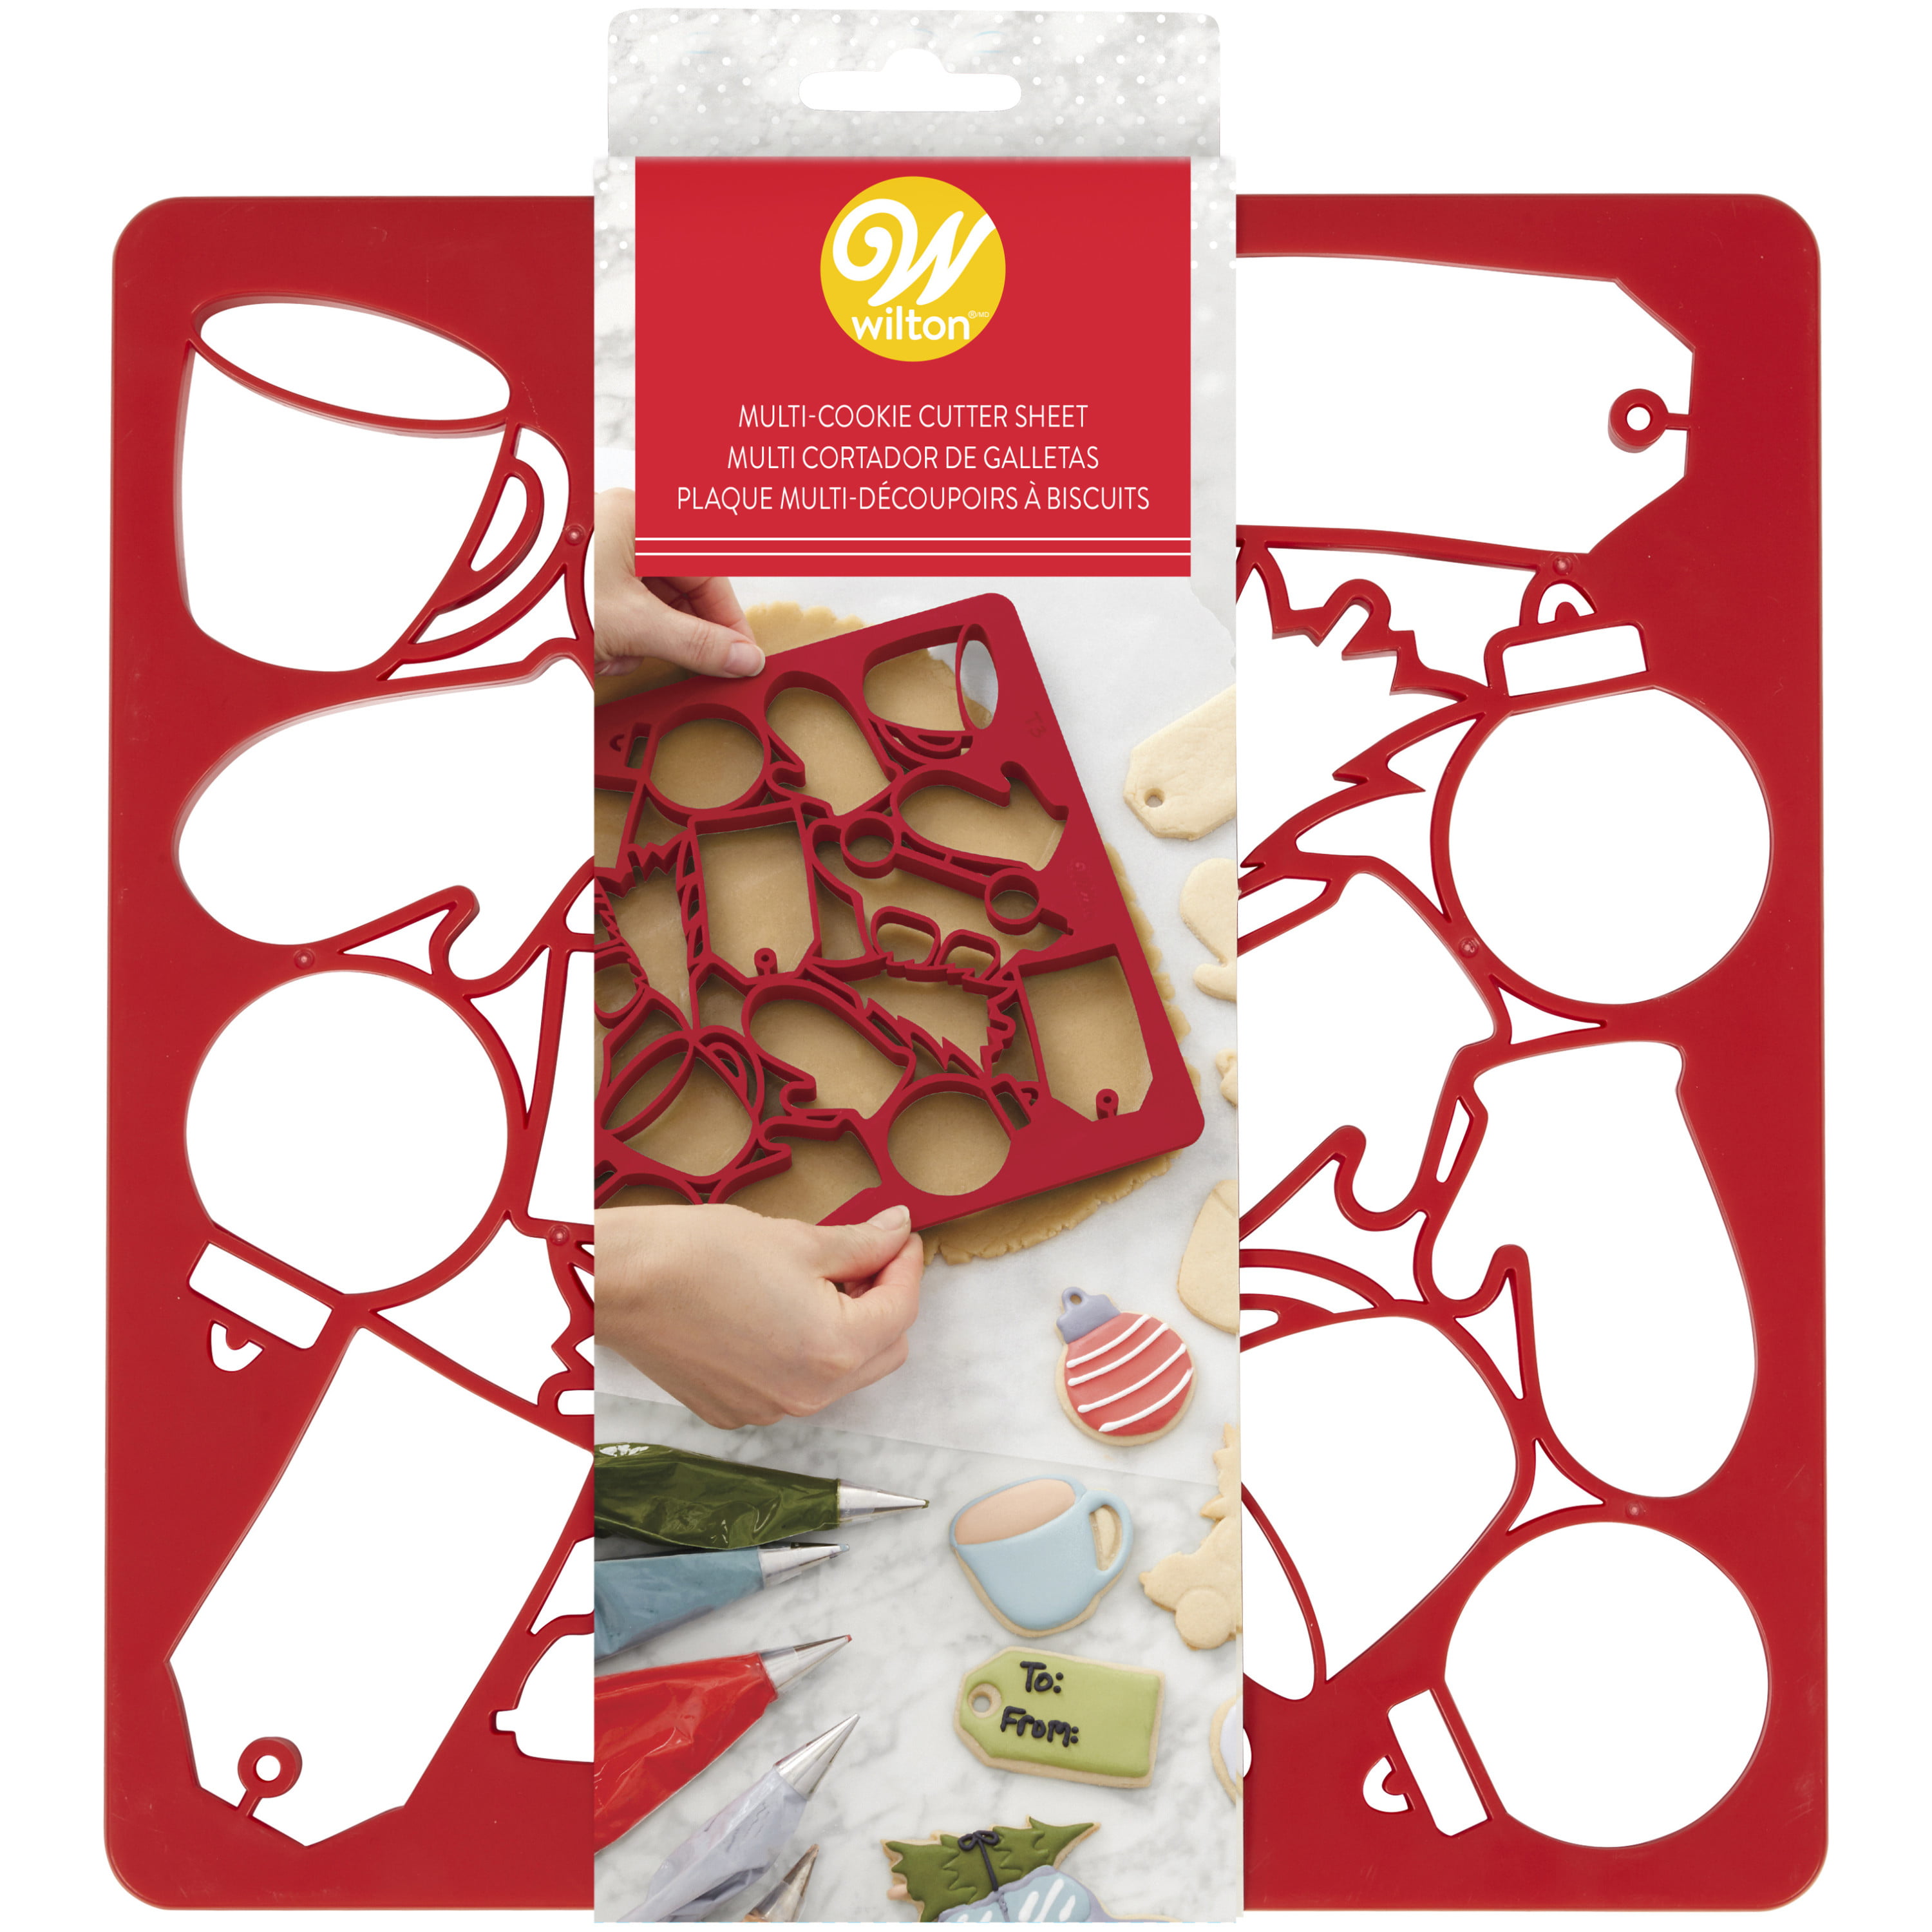 WILTON COOKIE CUTTER MULTIPAL SHAPES 1 CUTTER